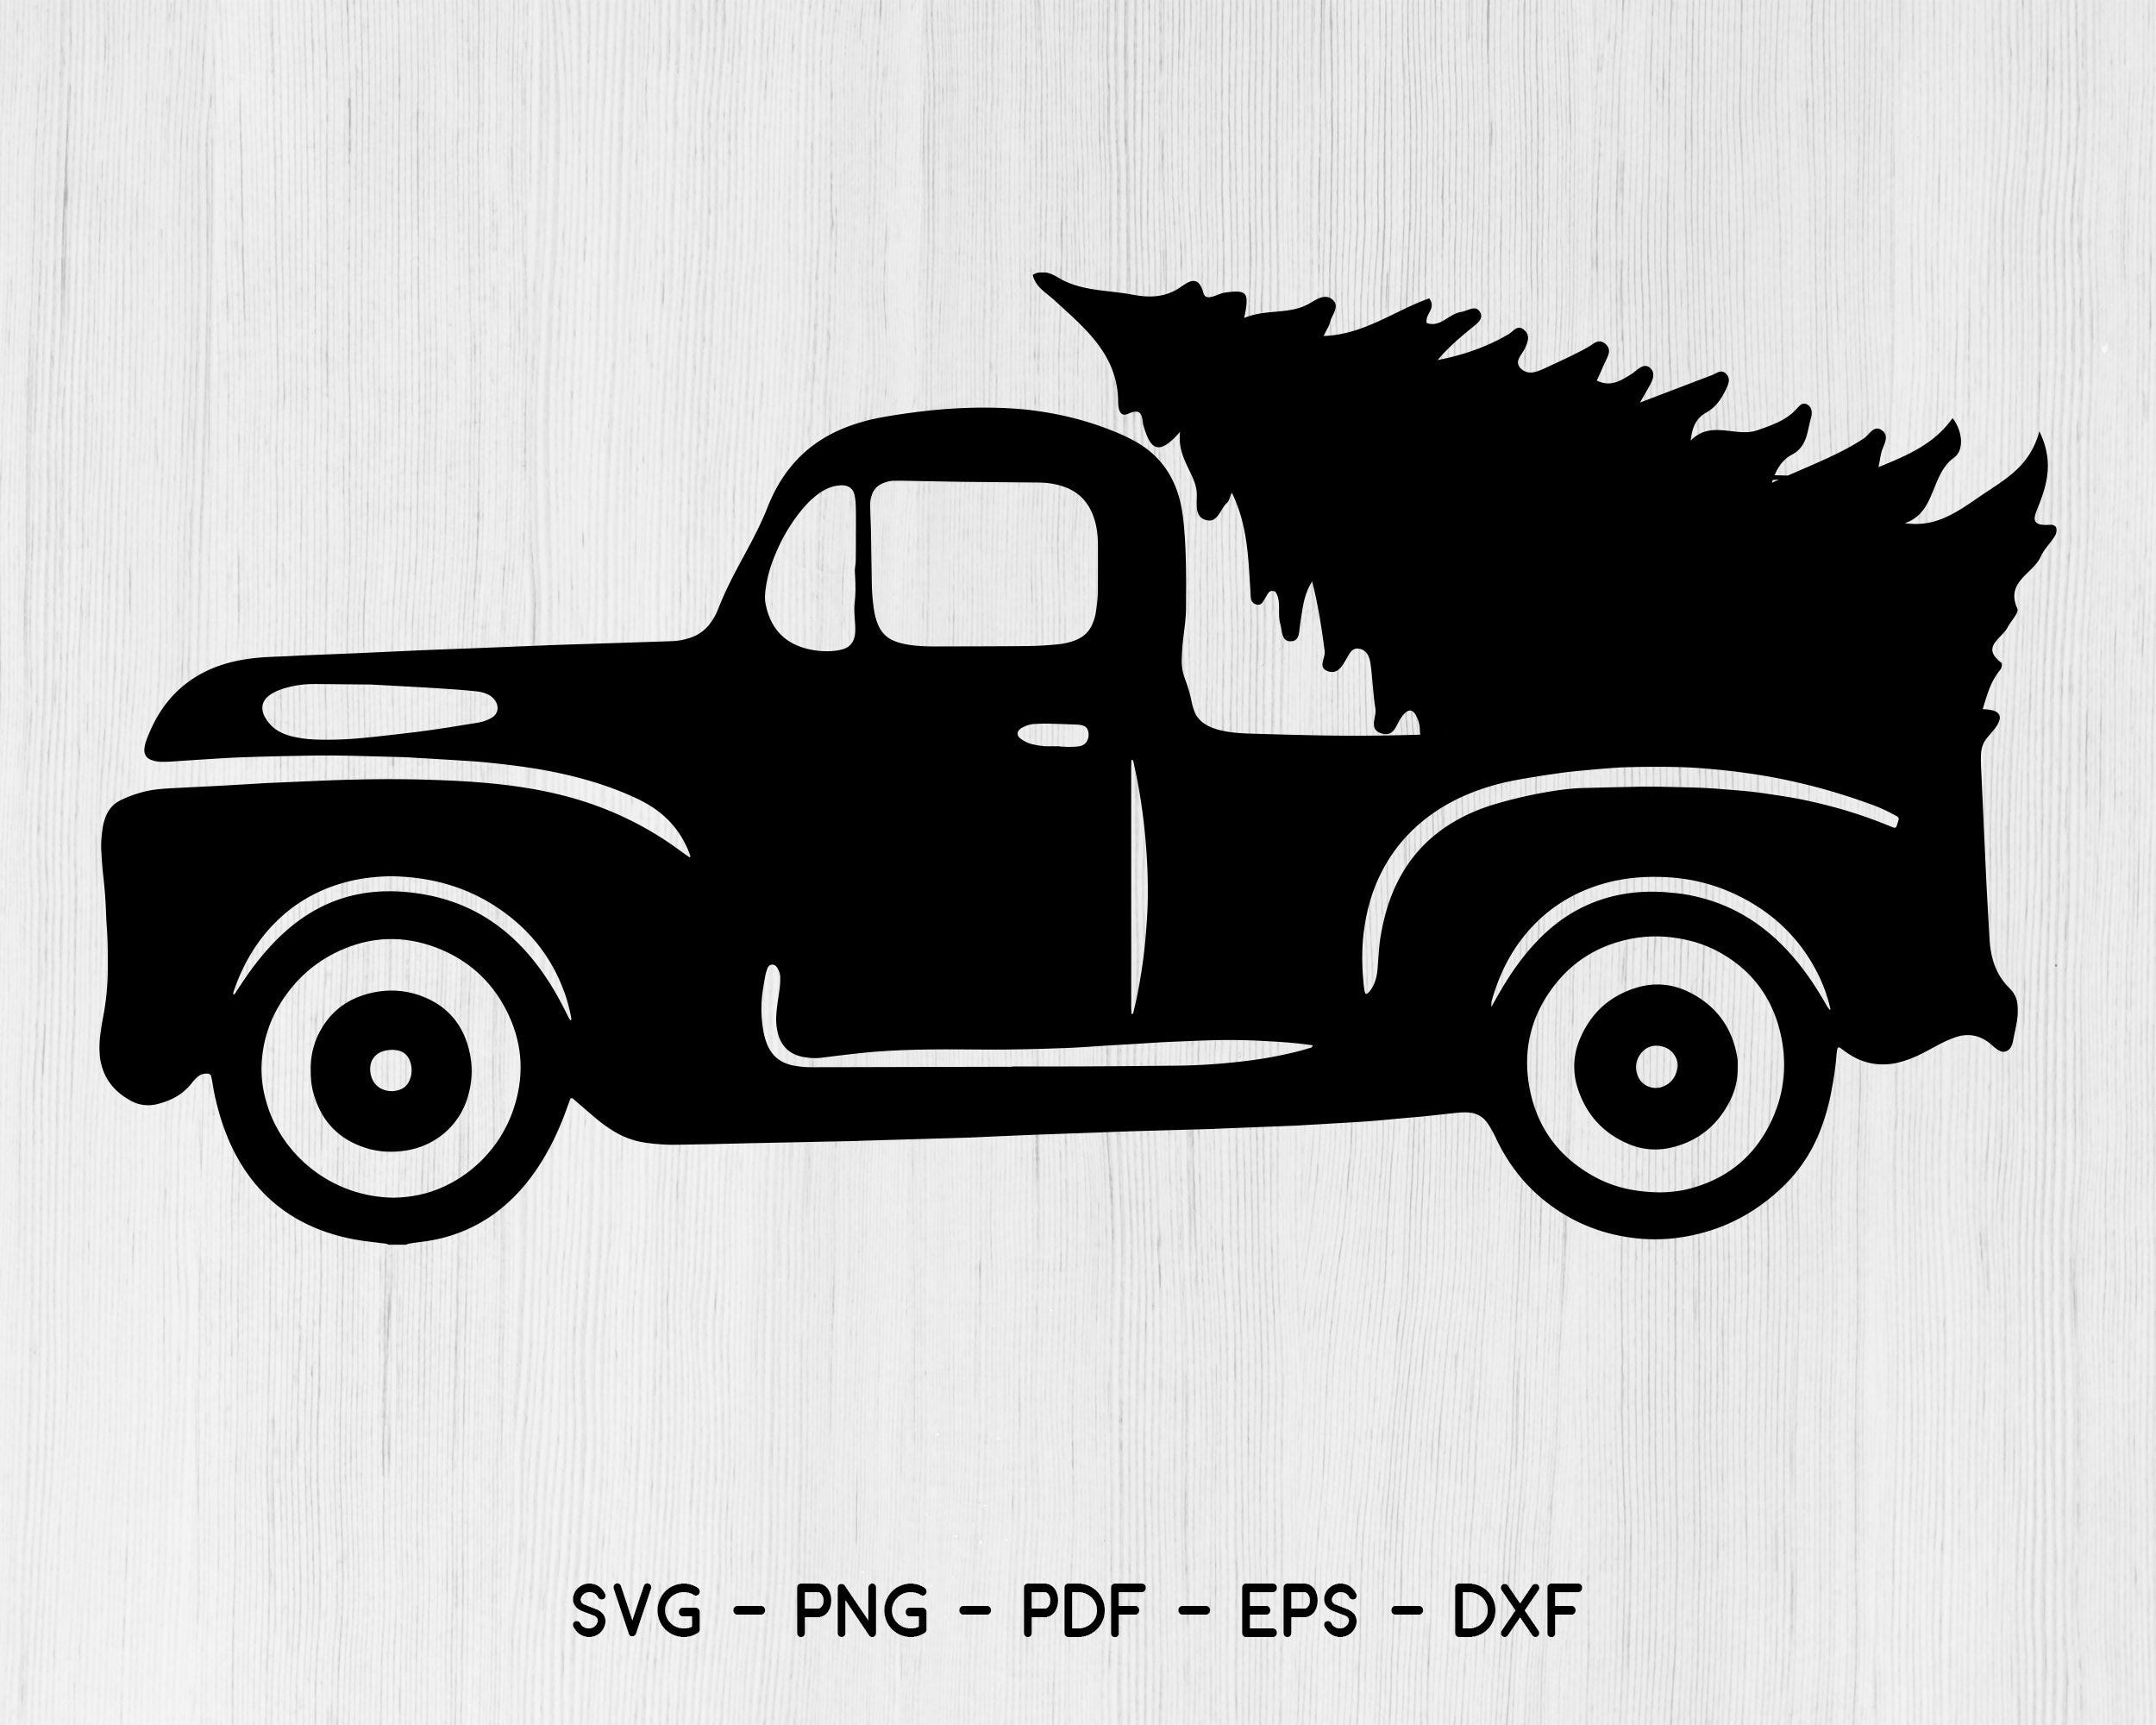 Christmas Truck svg, Christmas truck tree svg, Christmas svg, tree svg, dxf, jpeg, png, pdf cutting files for Silhouette Cameo, Cricut